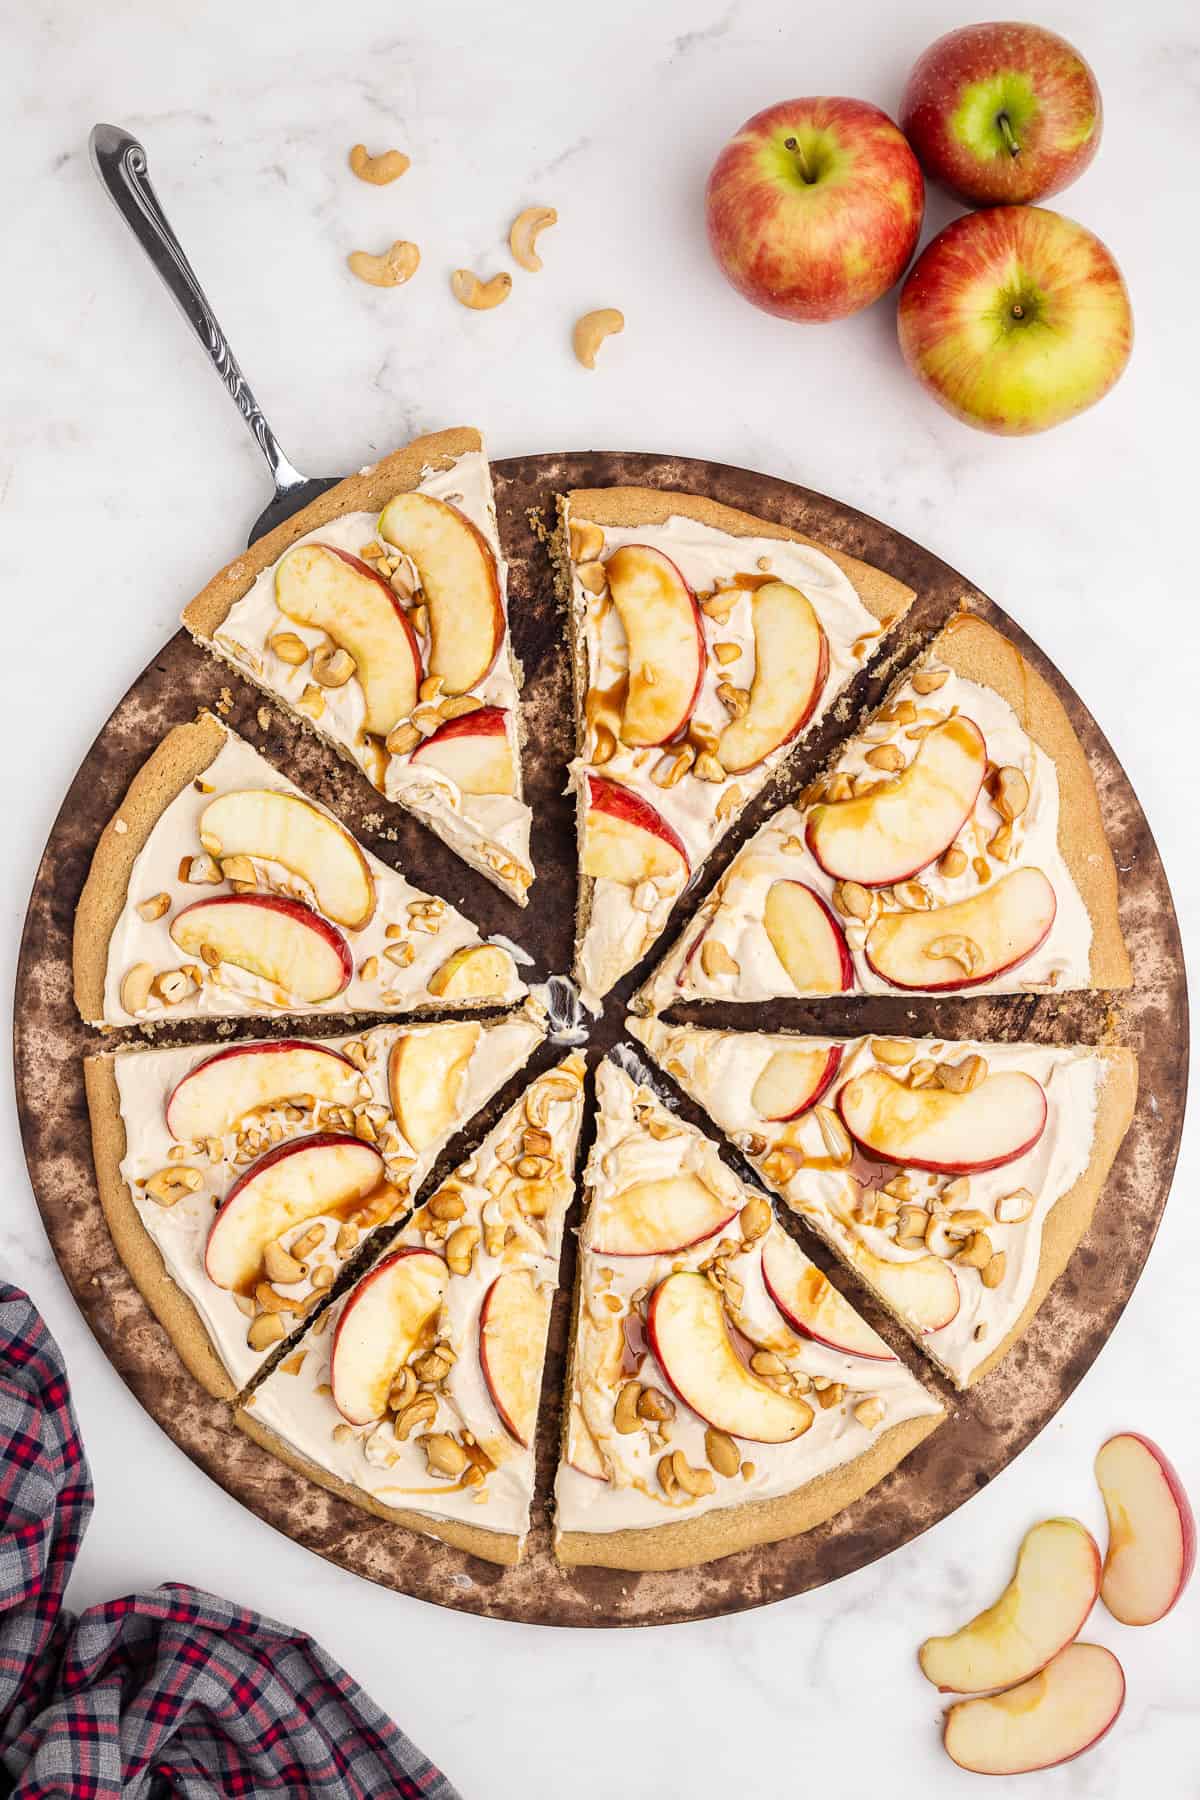 Sugar cookie pizza sliced with apples and caramel sauce.